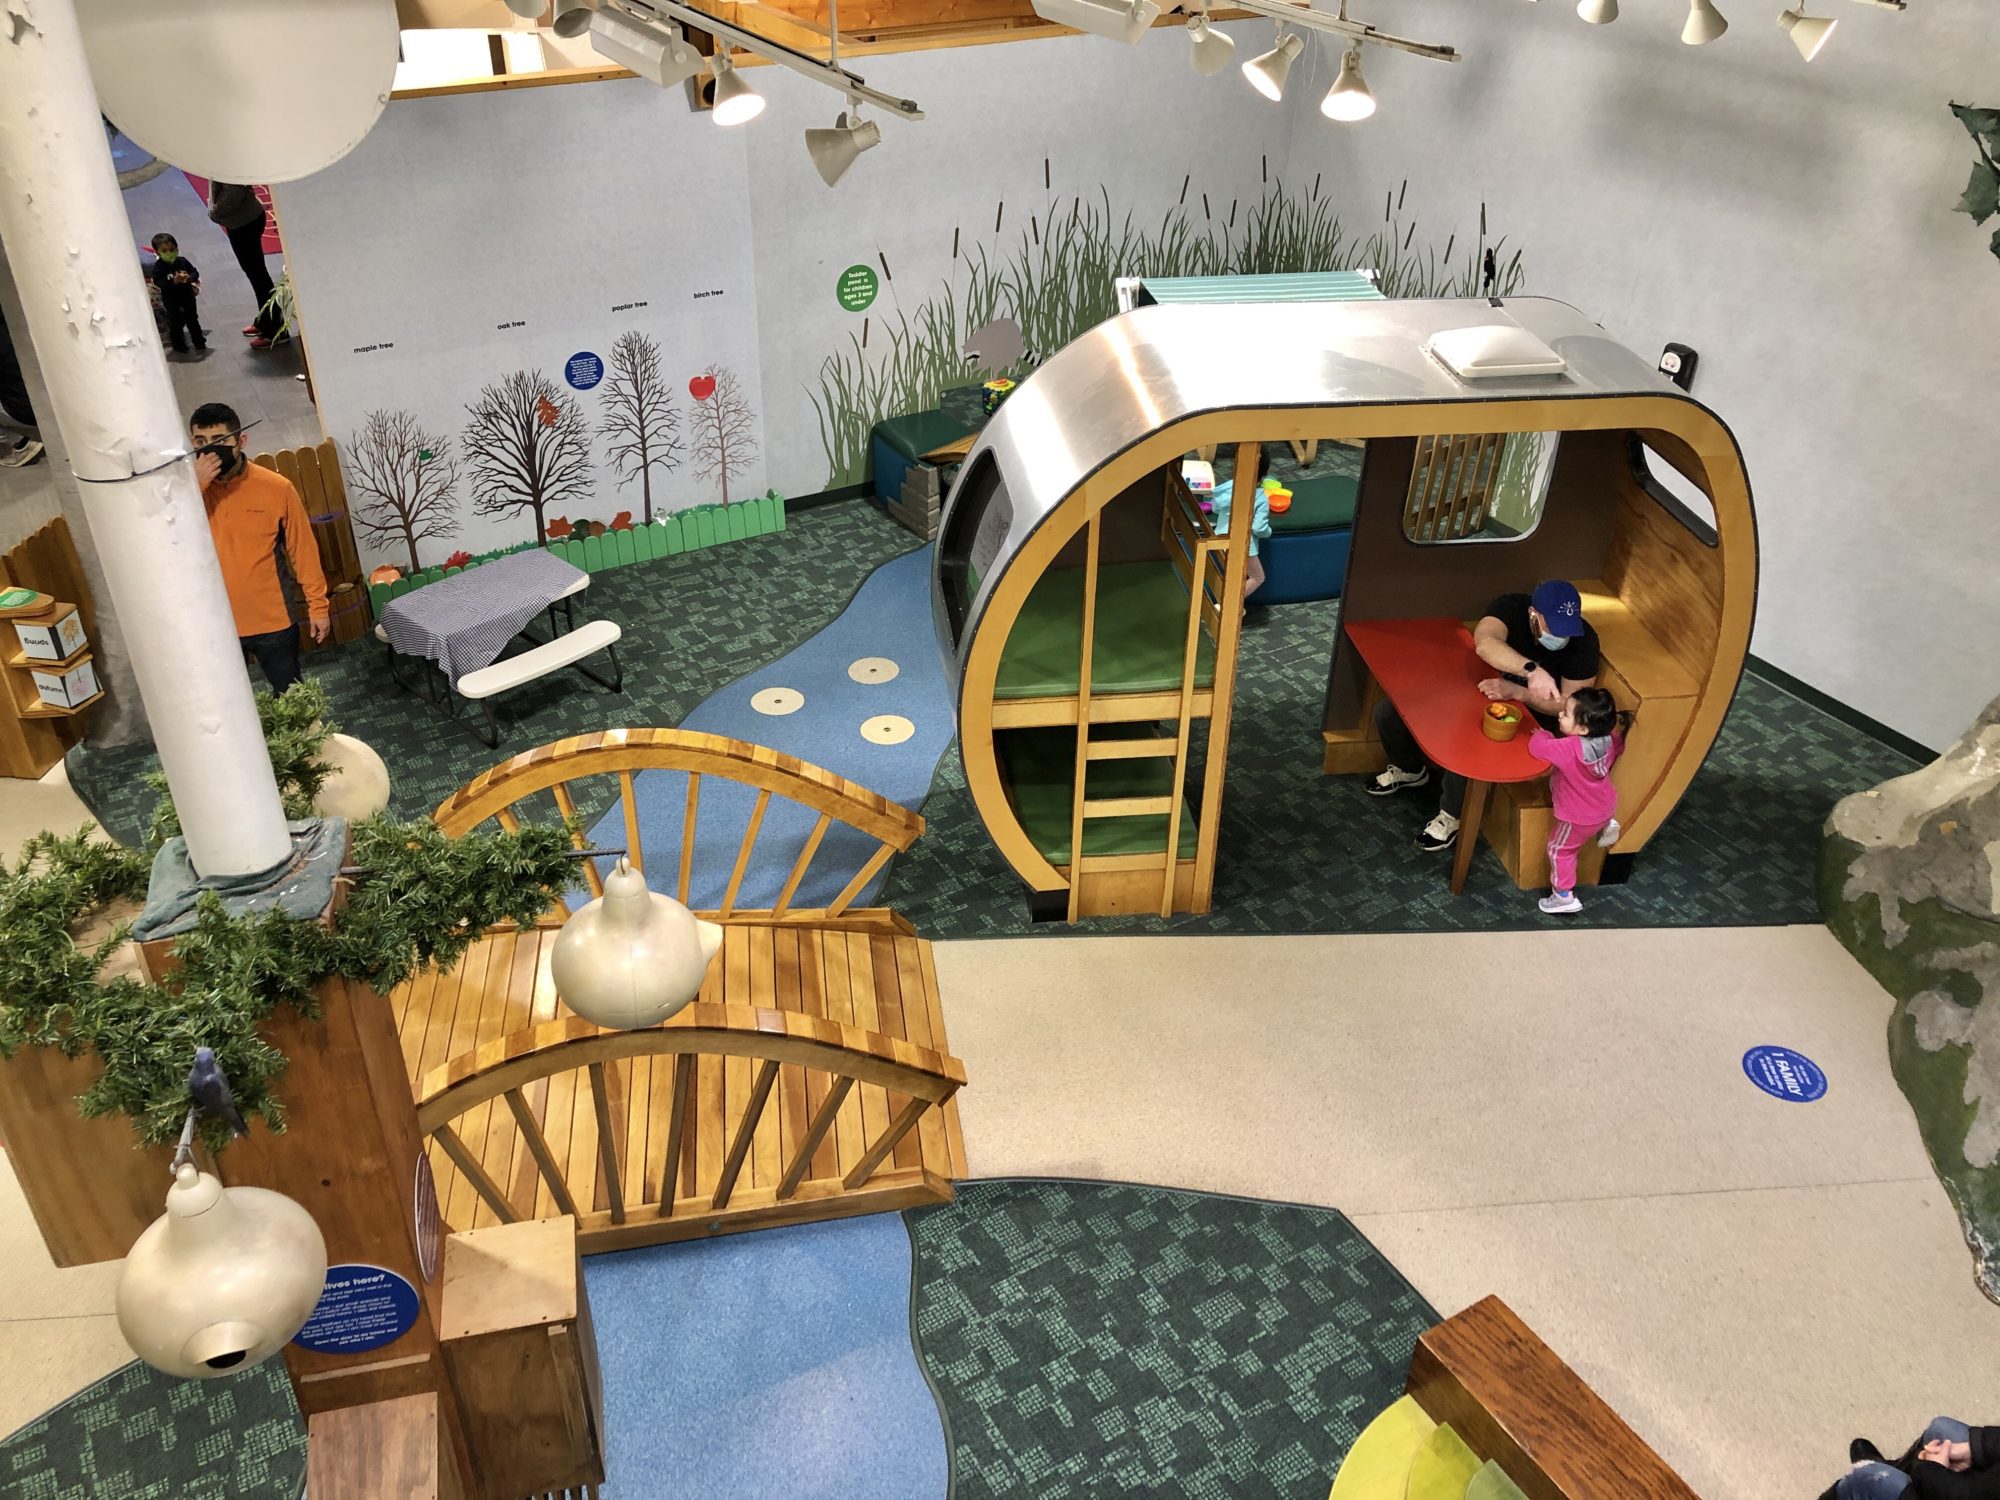 Worth the Drive: Kidscommons in Columbus, Indiana